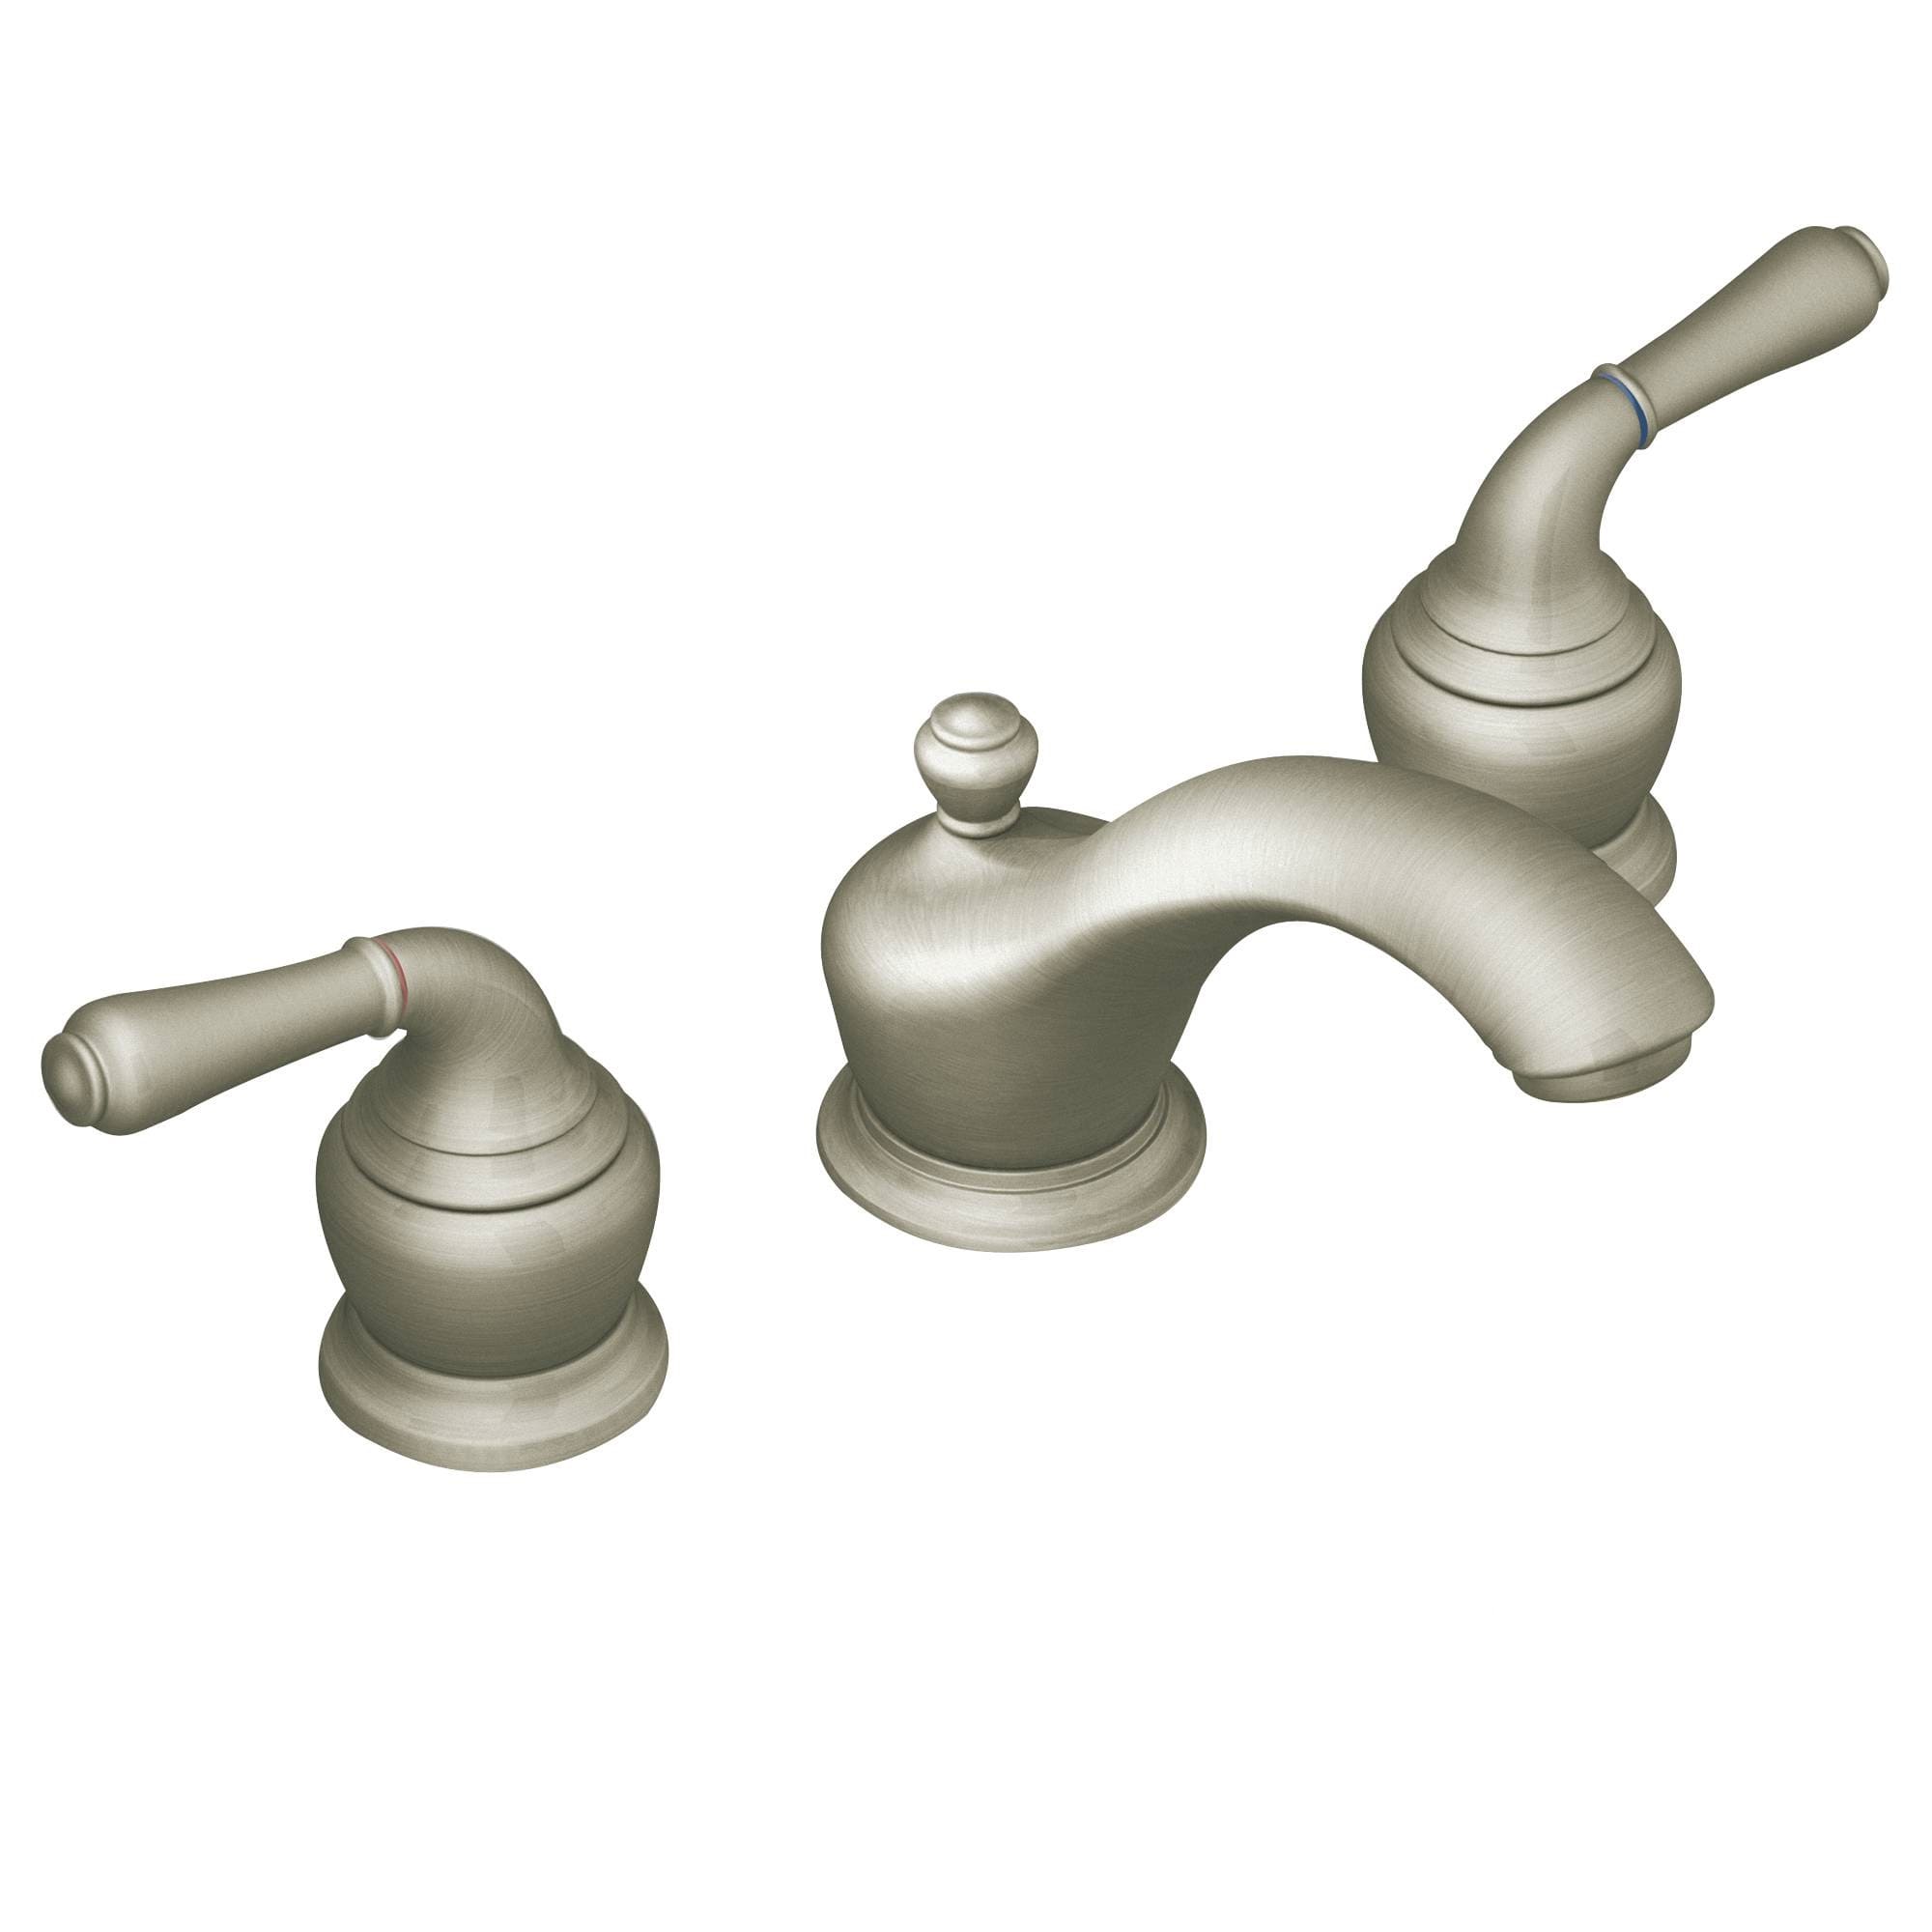 Moen Bathroom Faucet Collections Everything Bathroom